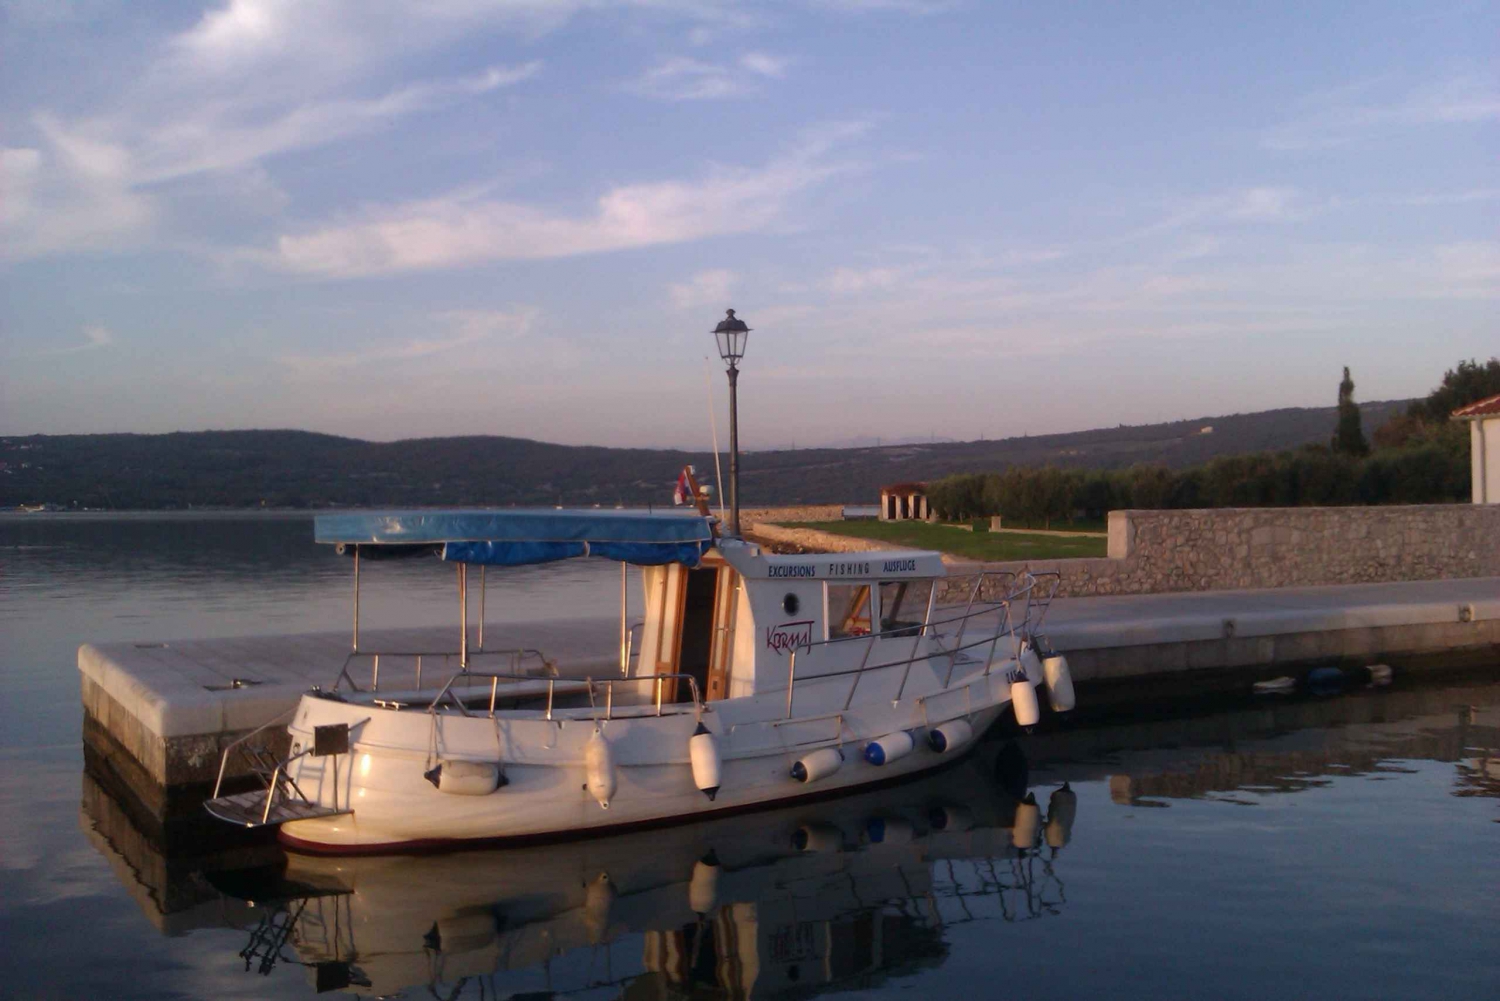 Punat-Private boat trip in the intact nature of Island Krk